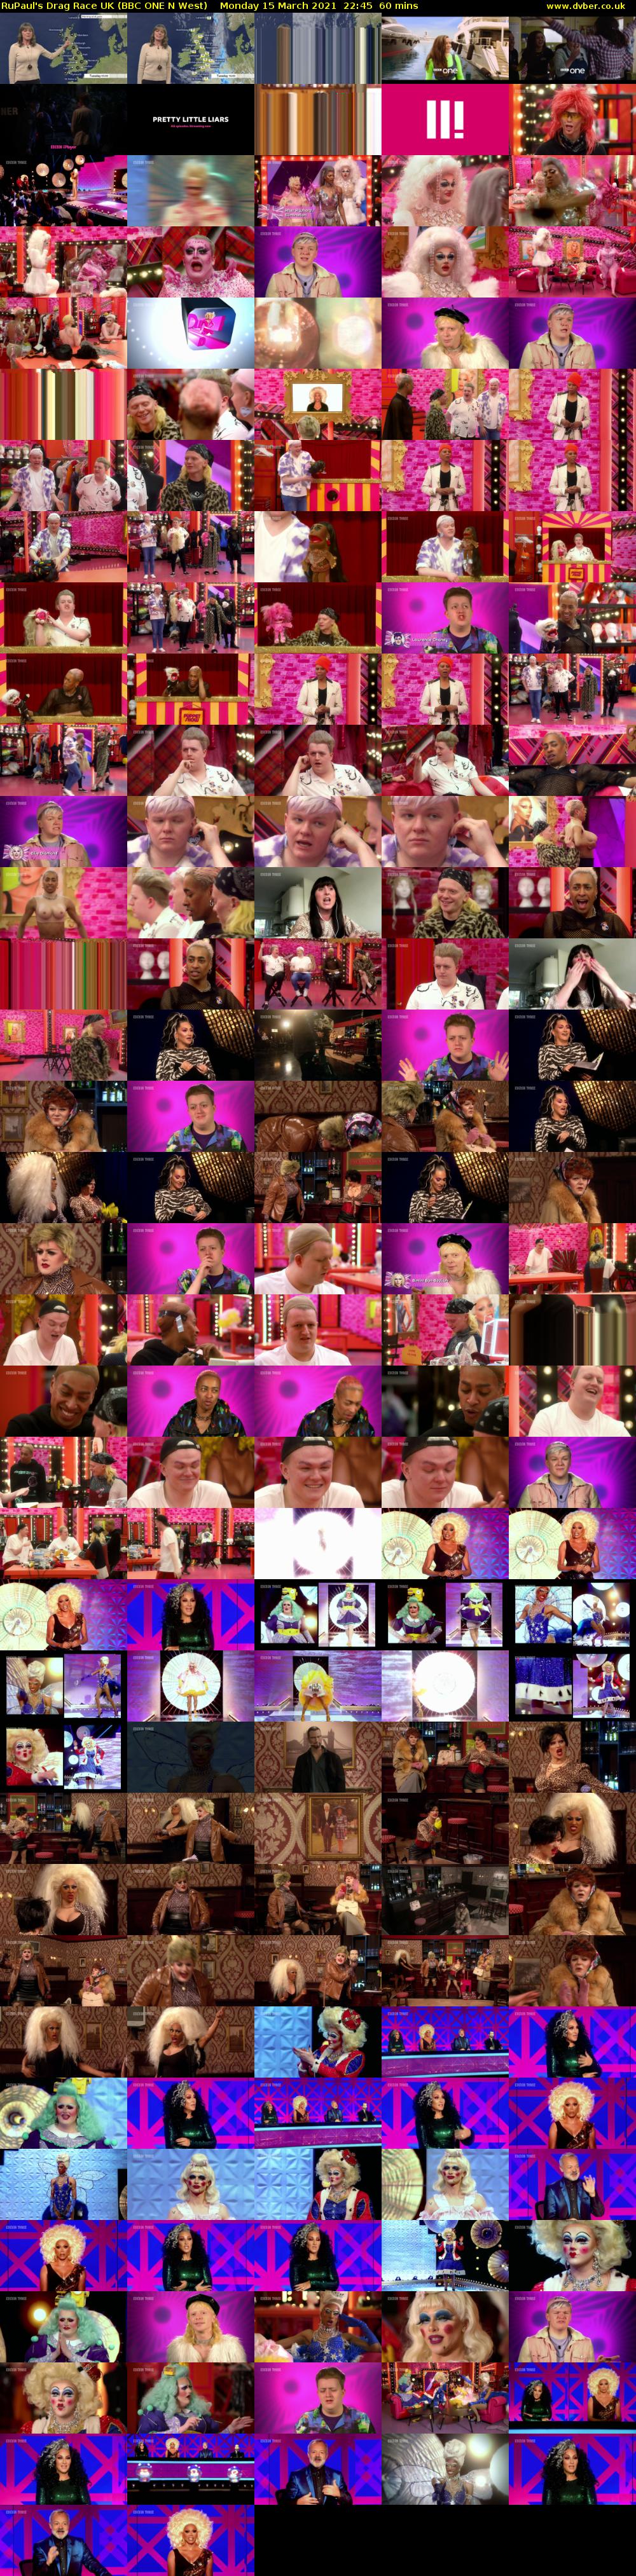 RuPaul's Drag Race UK (BBC ONE N West) Monday 15 March 2021 22:45 - 23:45